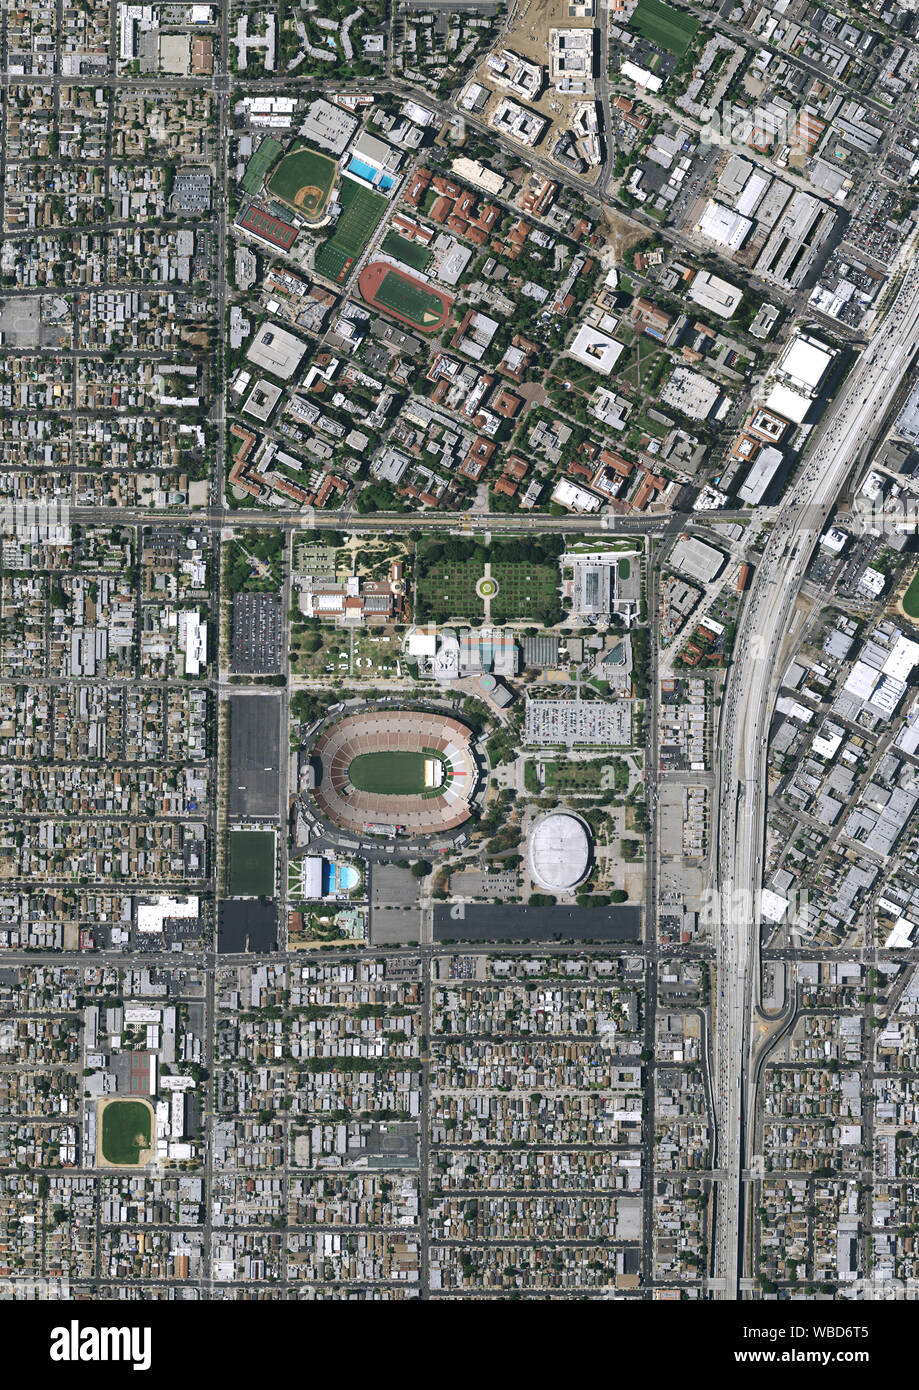 Aerial photography of Los Angeles Memorial Coliseum, Los Angeles, California, USA. Image collected on July 7, 2016. Stock Photo